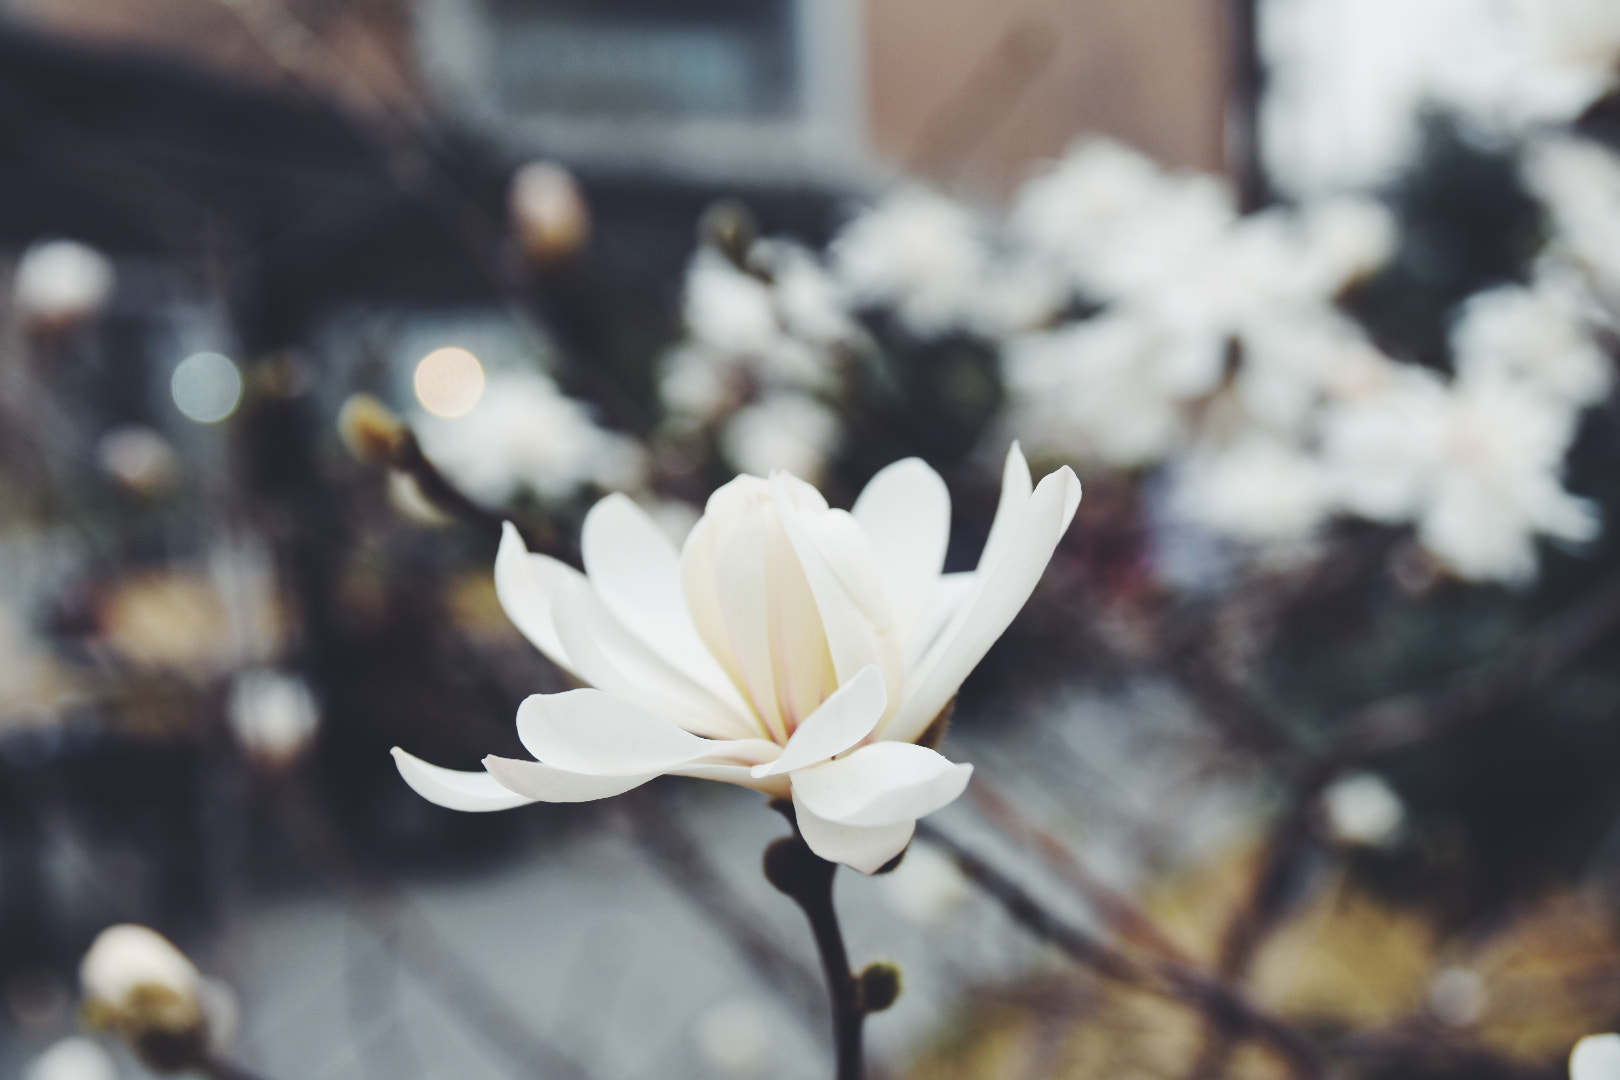 Nikon D7200 + Sigma 17-70mm F2.8-4 DC Macro OS HSM | C sample photo. Processed with vsco with f2 preset photography